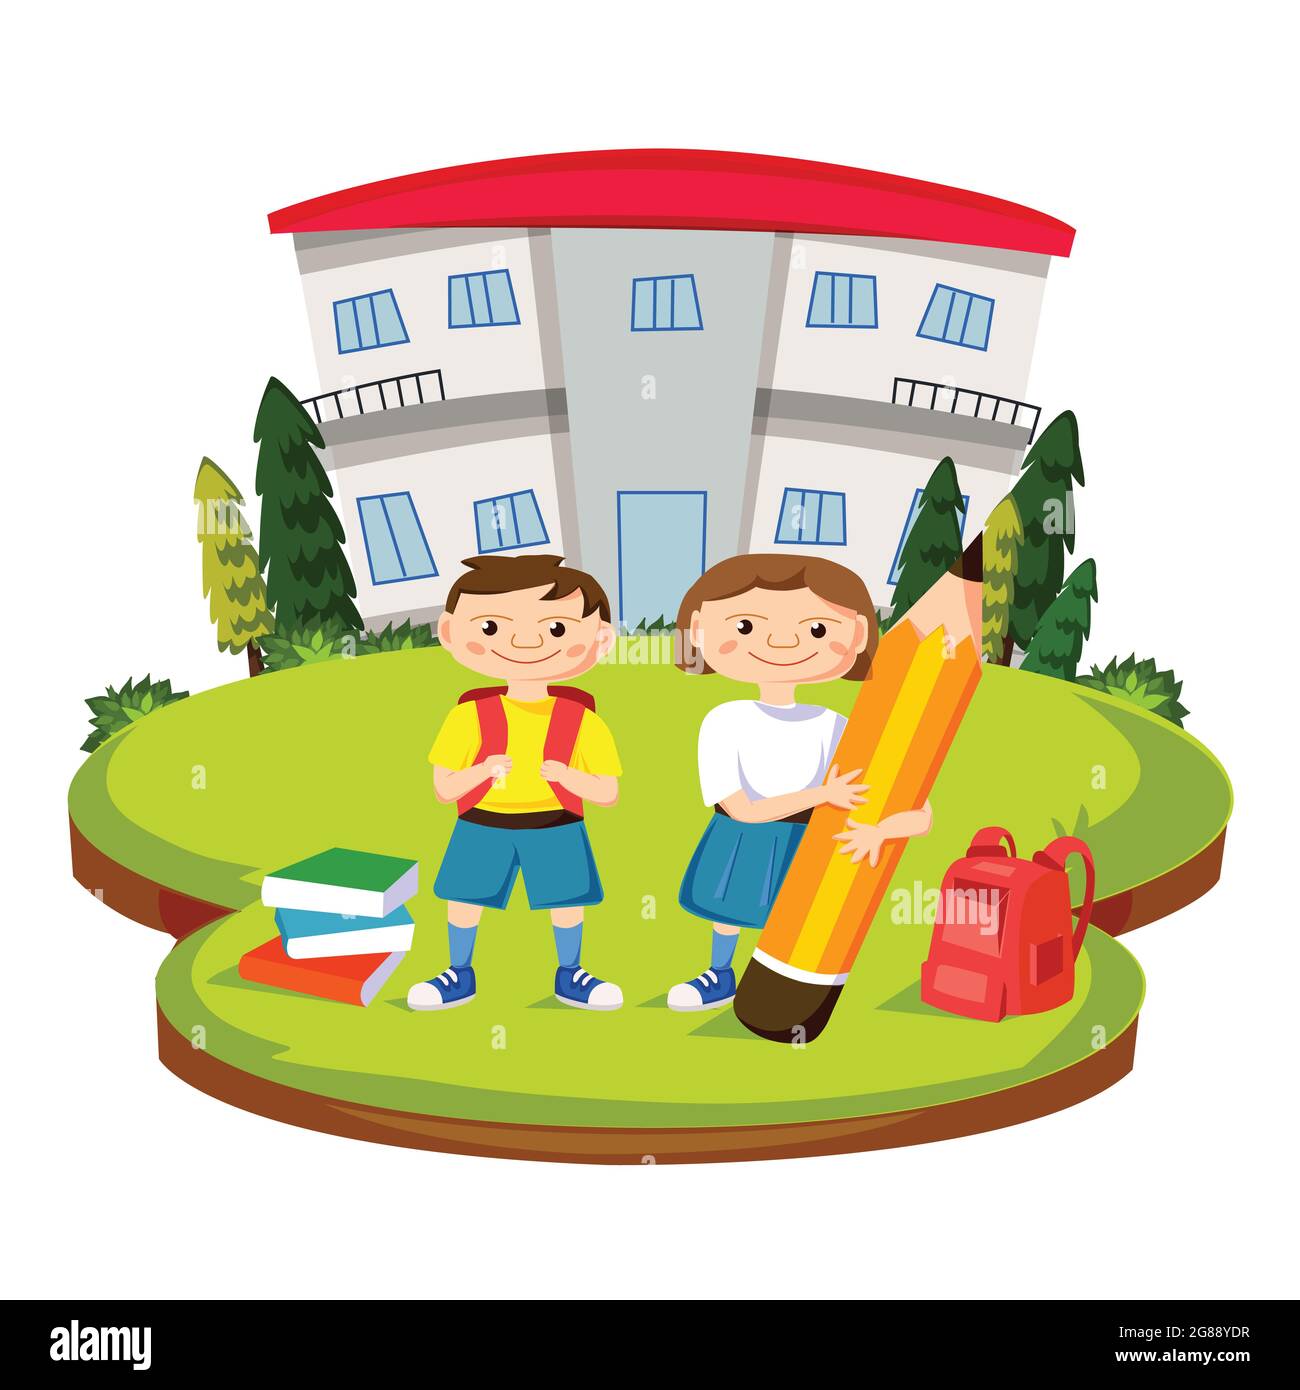 Illustration of Back to School. Students happily stand in front of the school. The poster is decorated with School buildings, books, and school bags. Stock Vector